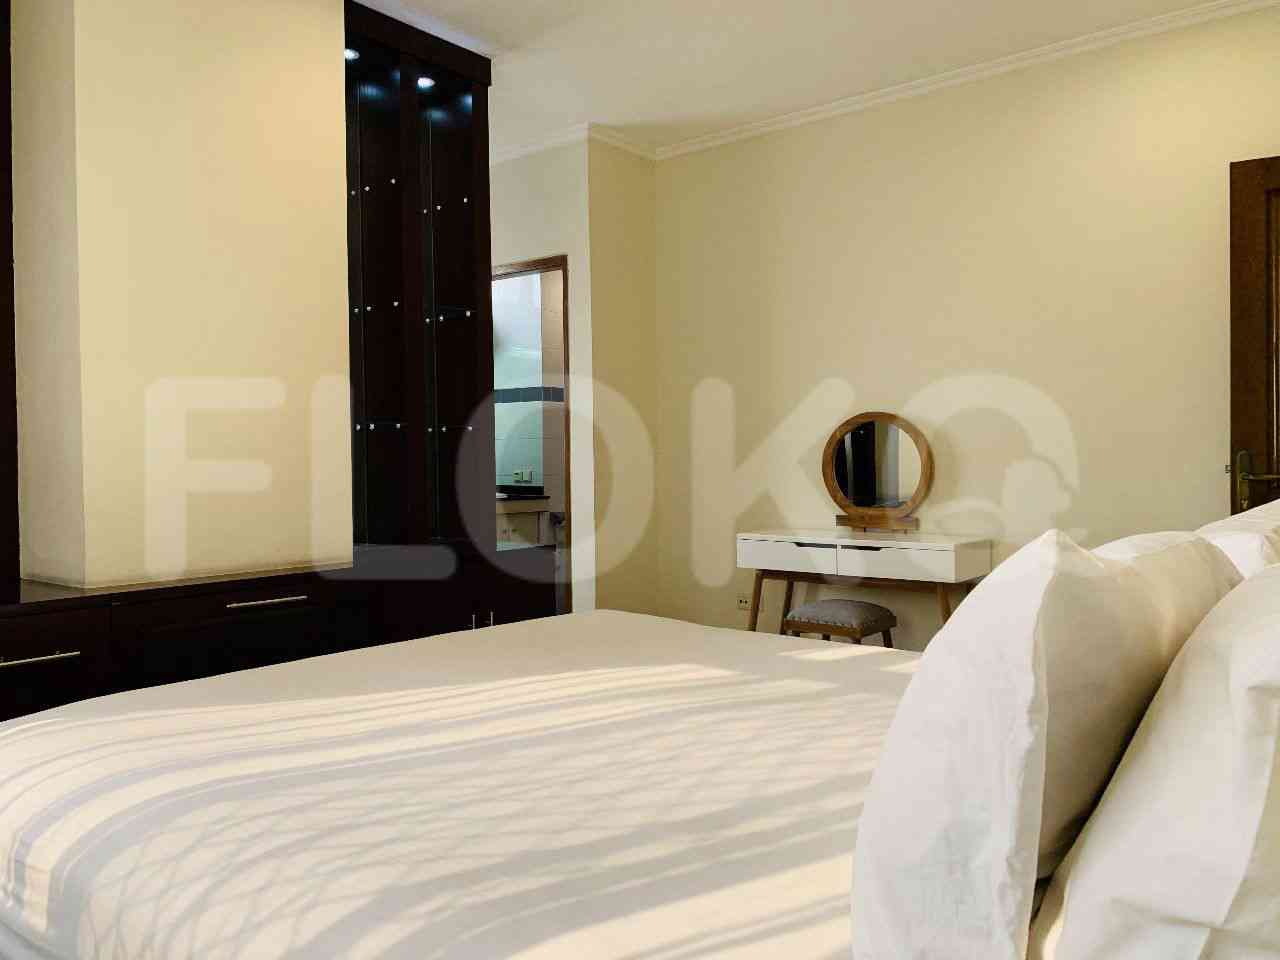 3 Bedroom on 4th Floor for Rent in Midtown Residence Simatupang - ftb3cb 3